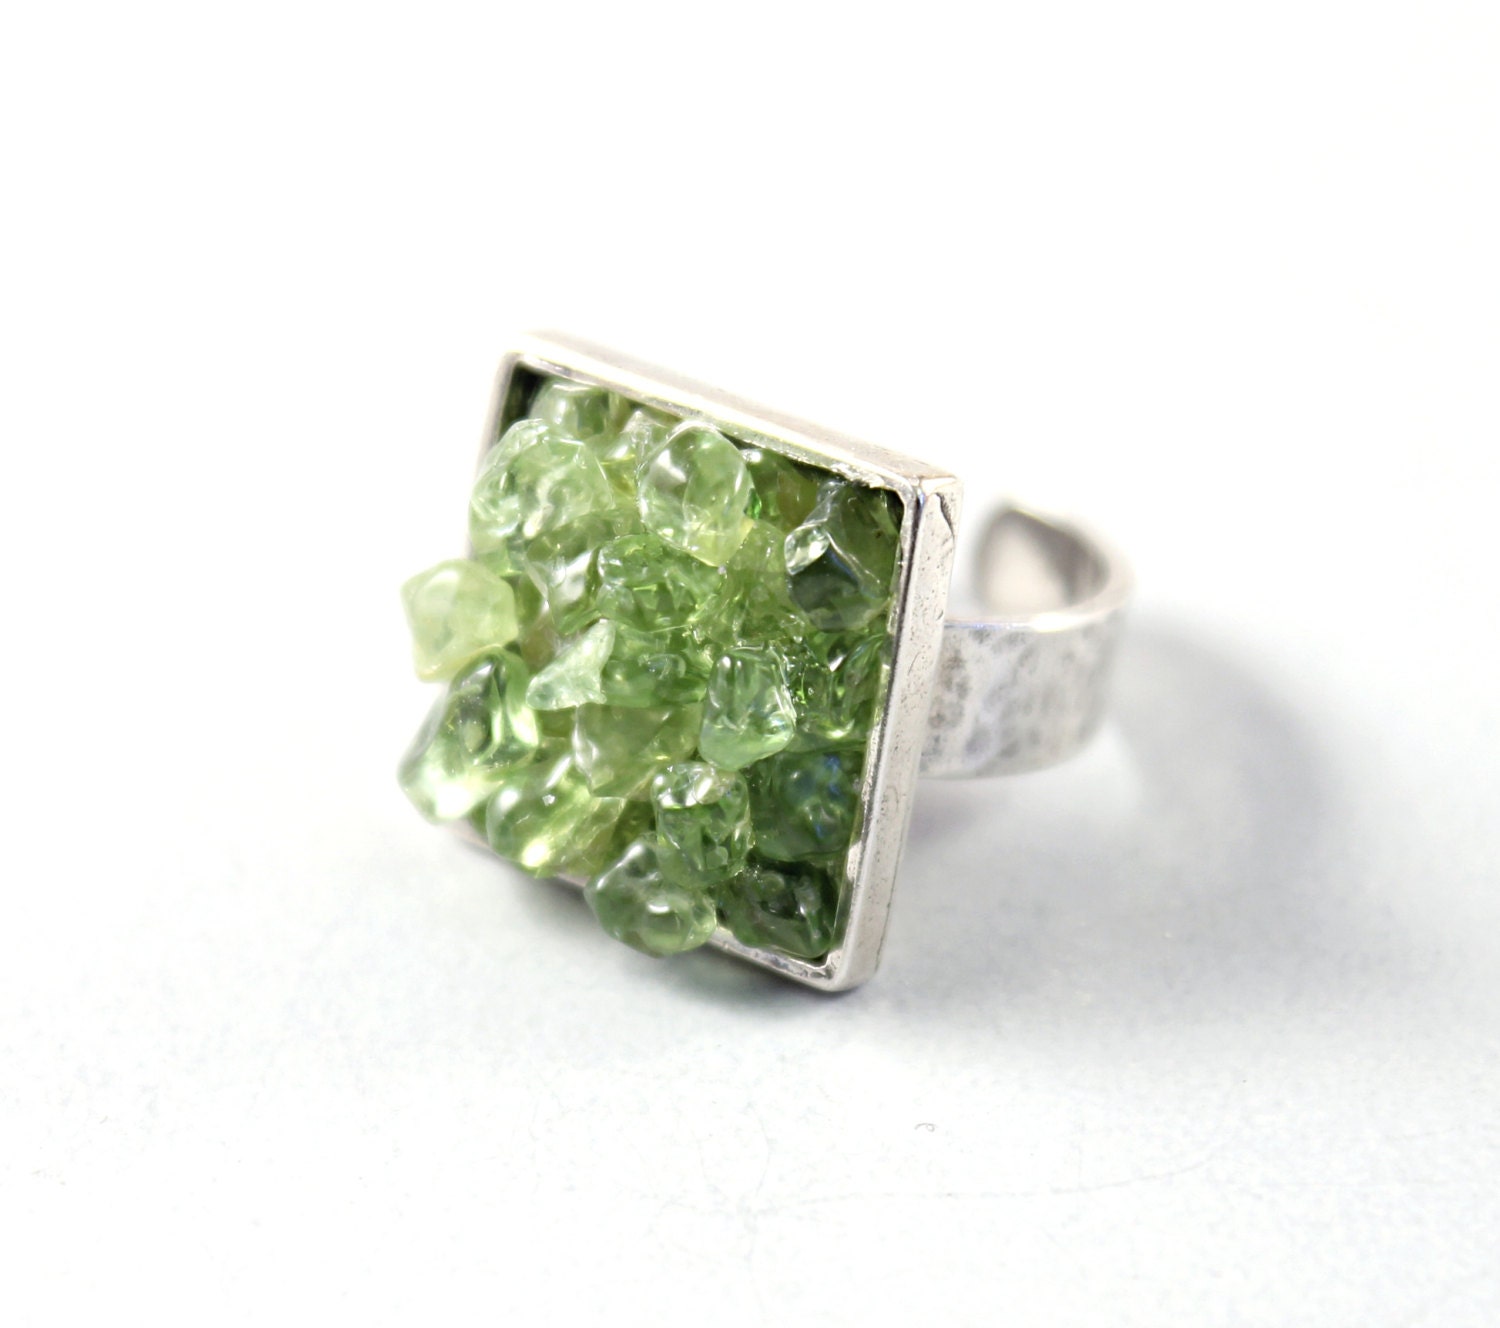 Silver ring - big green crystal ring adjustable ring sterling jewelry by NatureLook - NatureLook